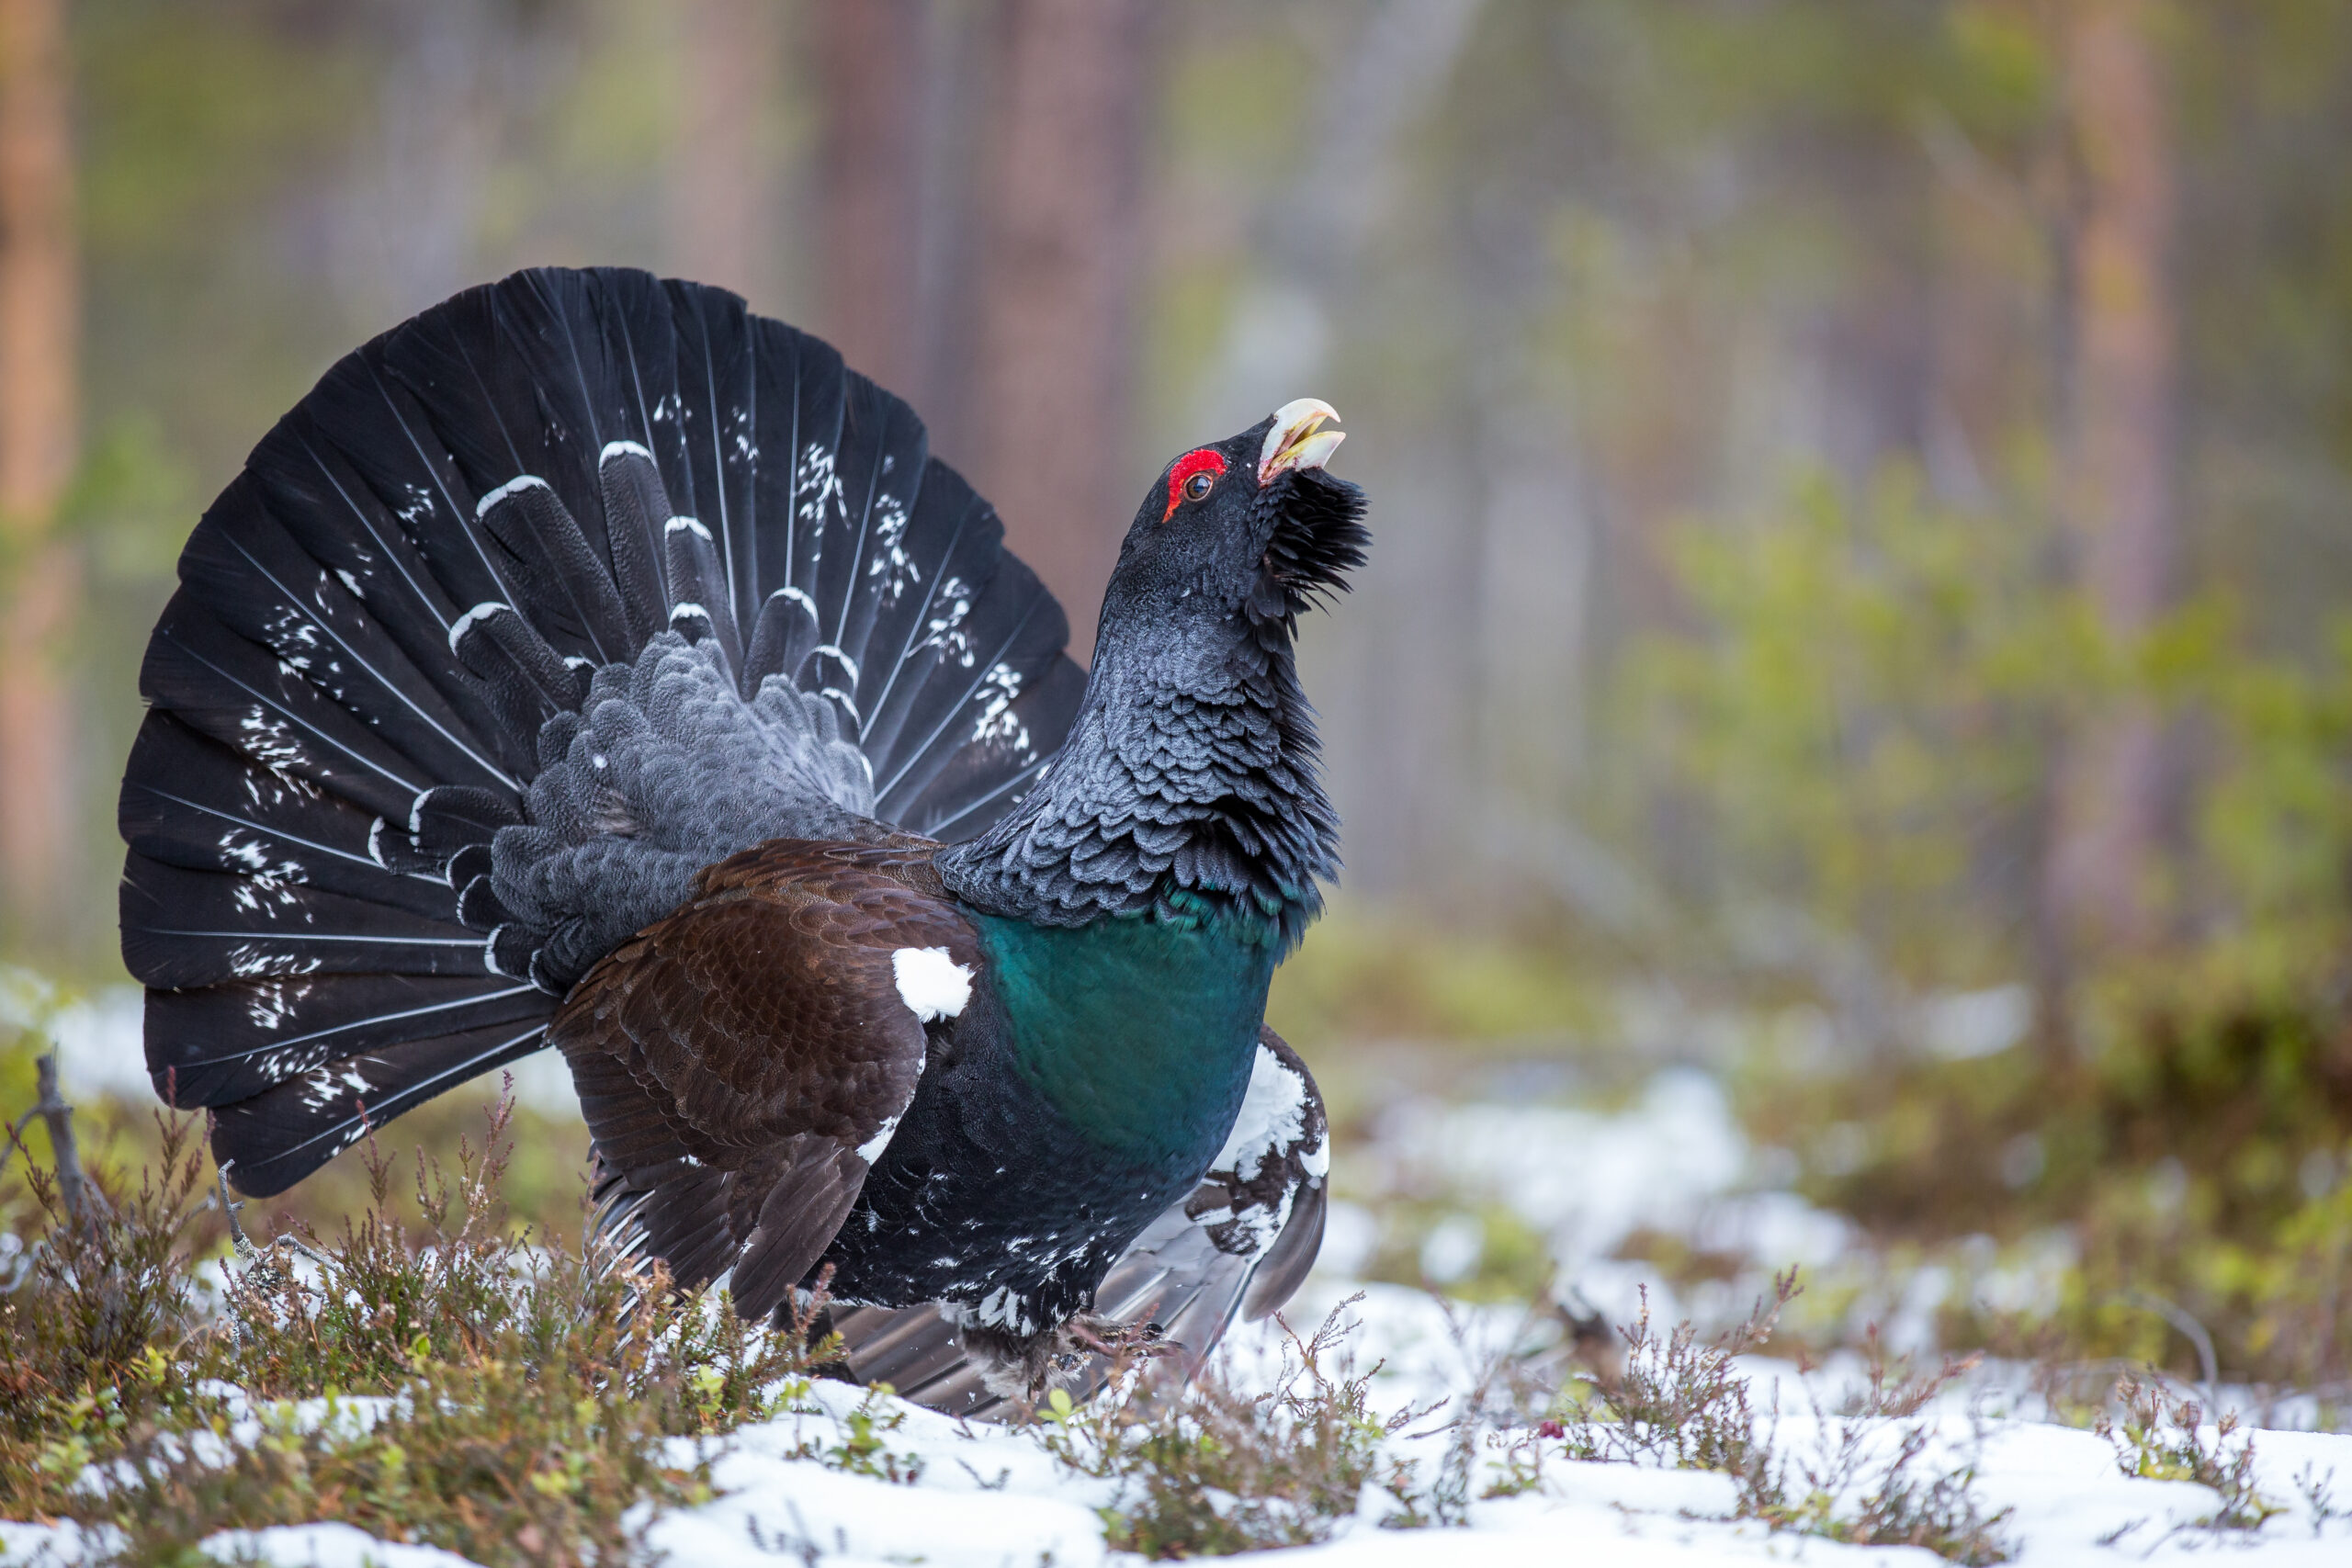 Highland whodunnit: something is killing the capercaillie, that swaggering, iconic bird of Scotland